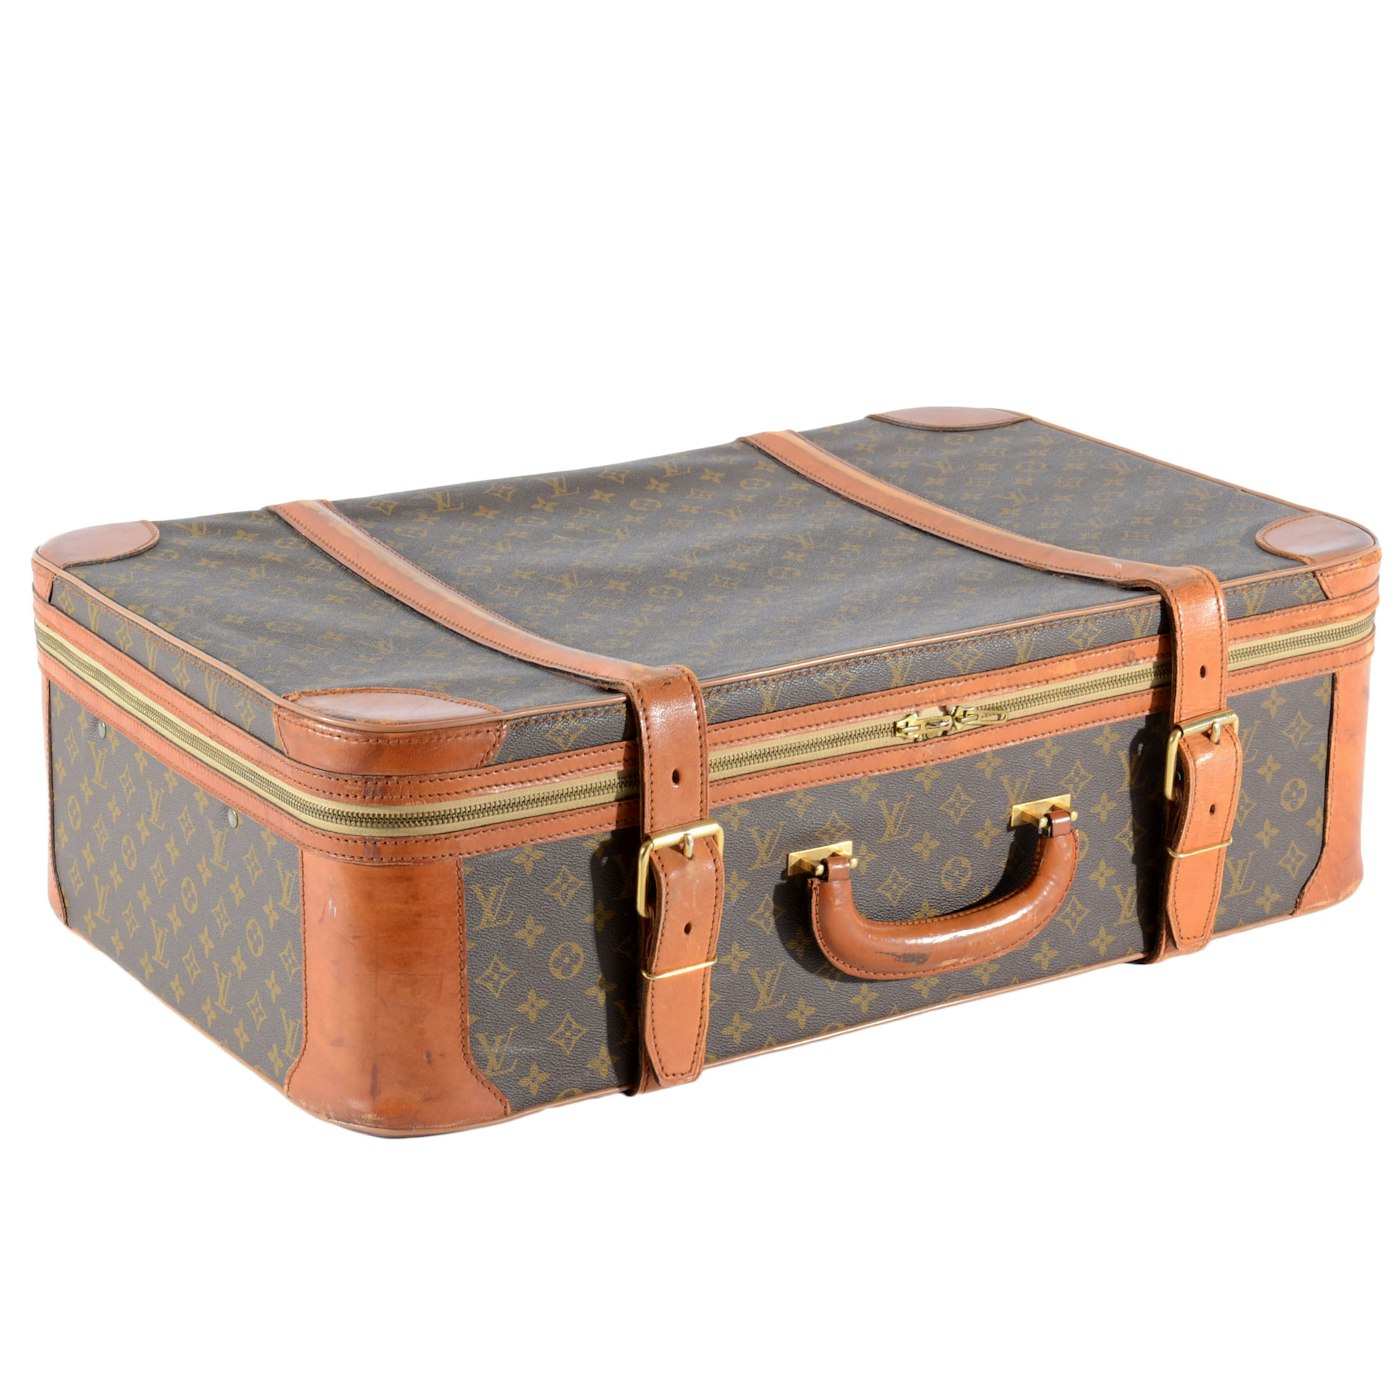 Darjeeling Limited luggage, Marc Jacobs for Louis Vuitton*